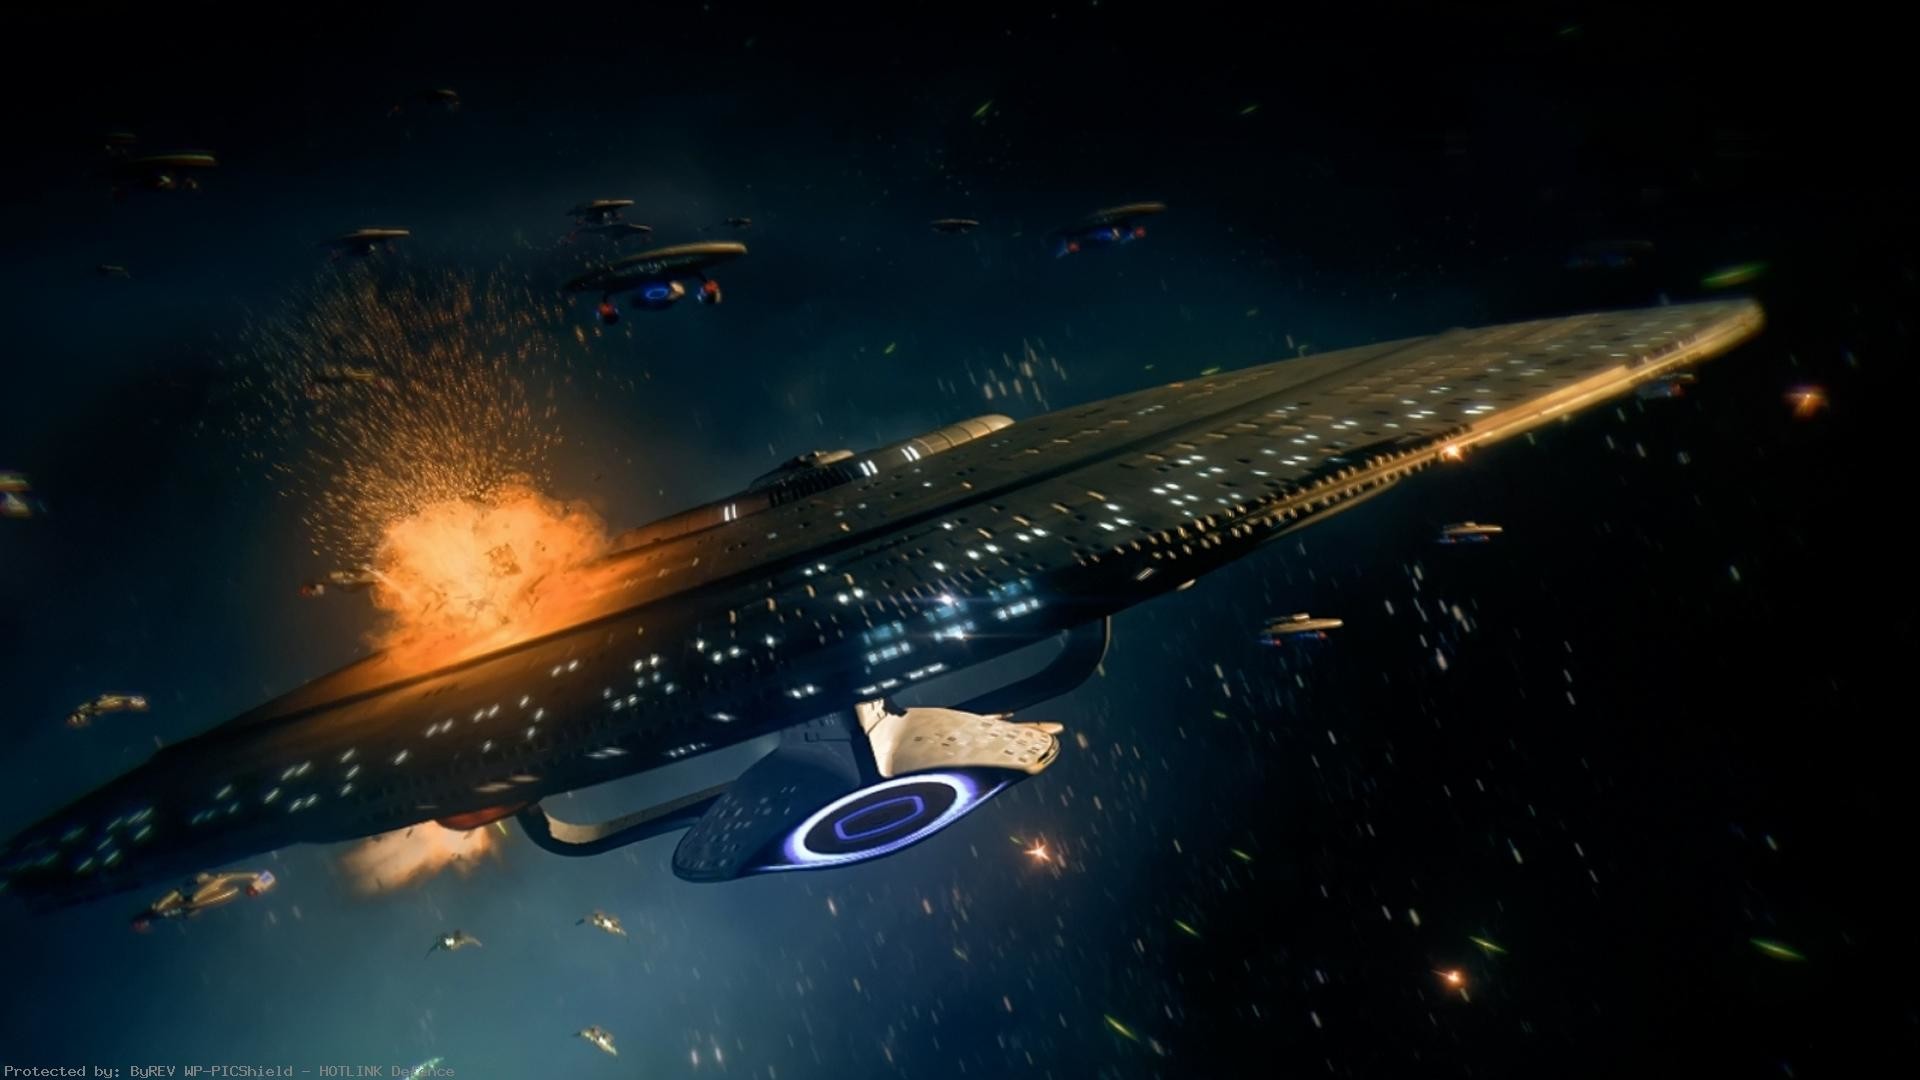 1920x1080 The-Galaxy-class-Enterprise-D-from-the-Star-